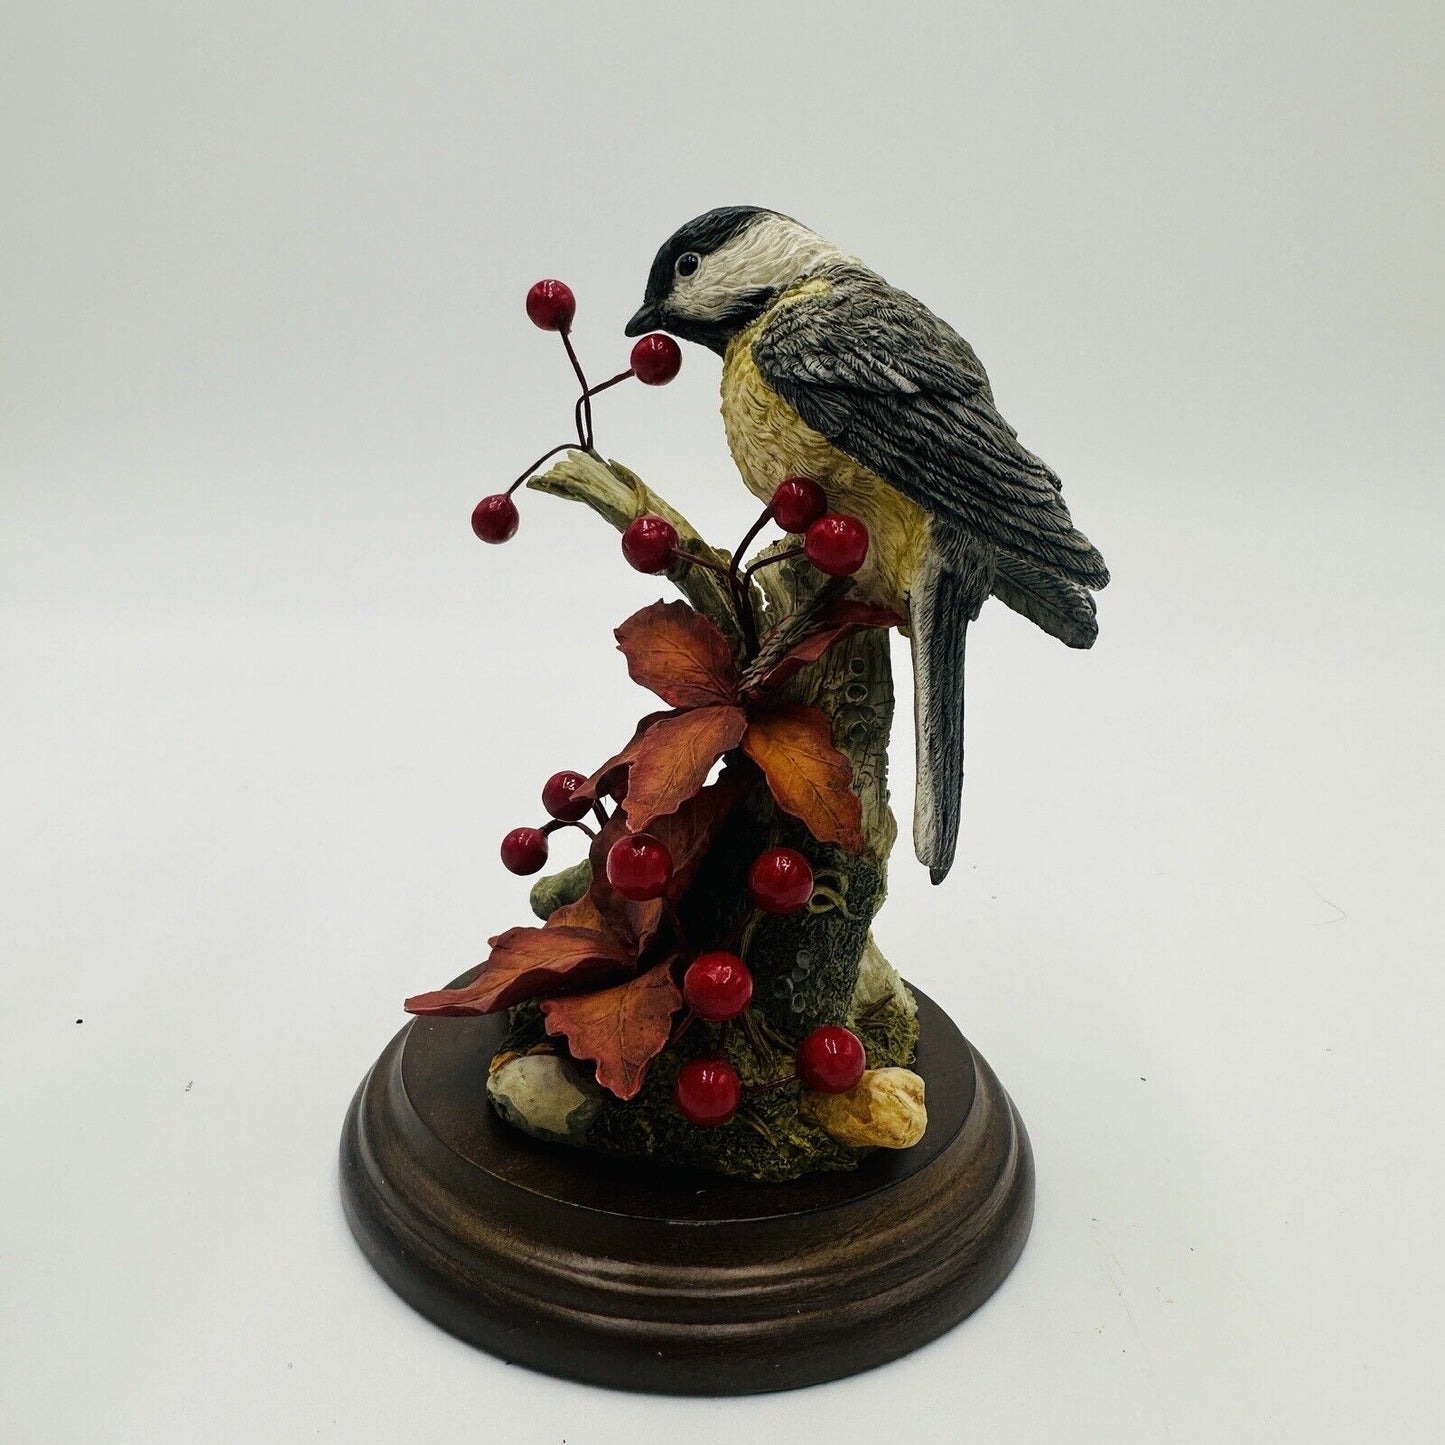 Country Artists HAND PAINTED 01700 B Capped Chickadee w Berries Figurine Signed